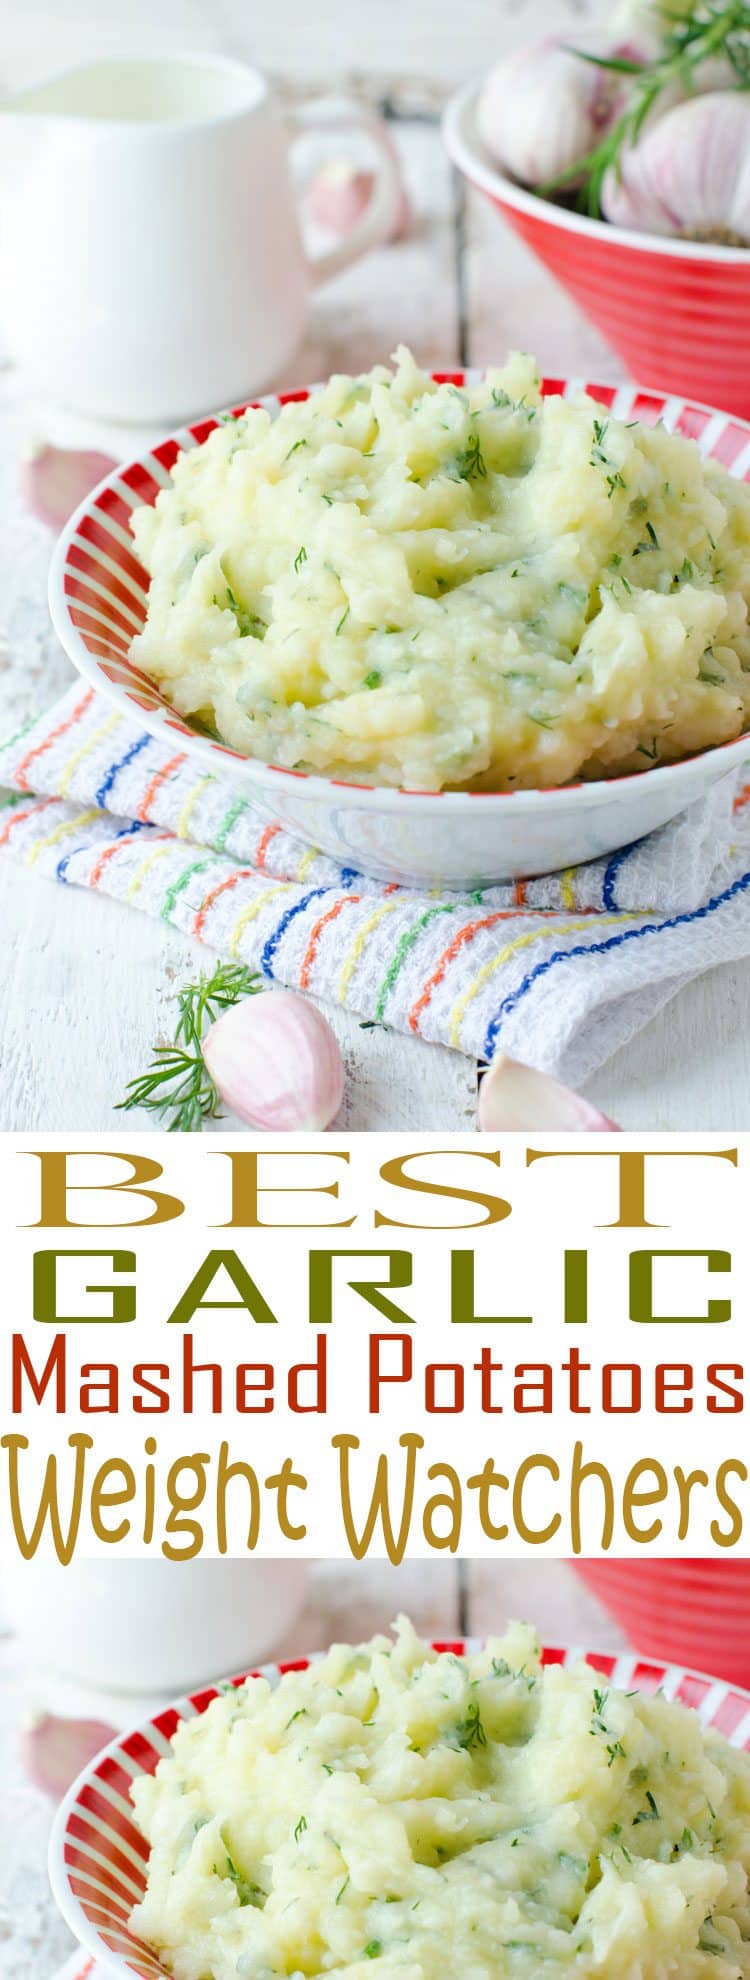 Weight Watchers Garlic Mashed Potatoes are an easy side dish recipe. You'll love these low fat mashed potatoes served alongside your main dish.